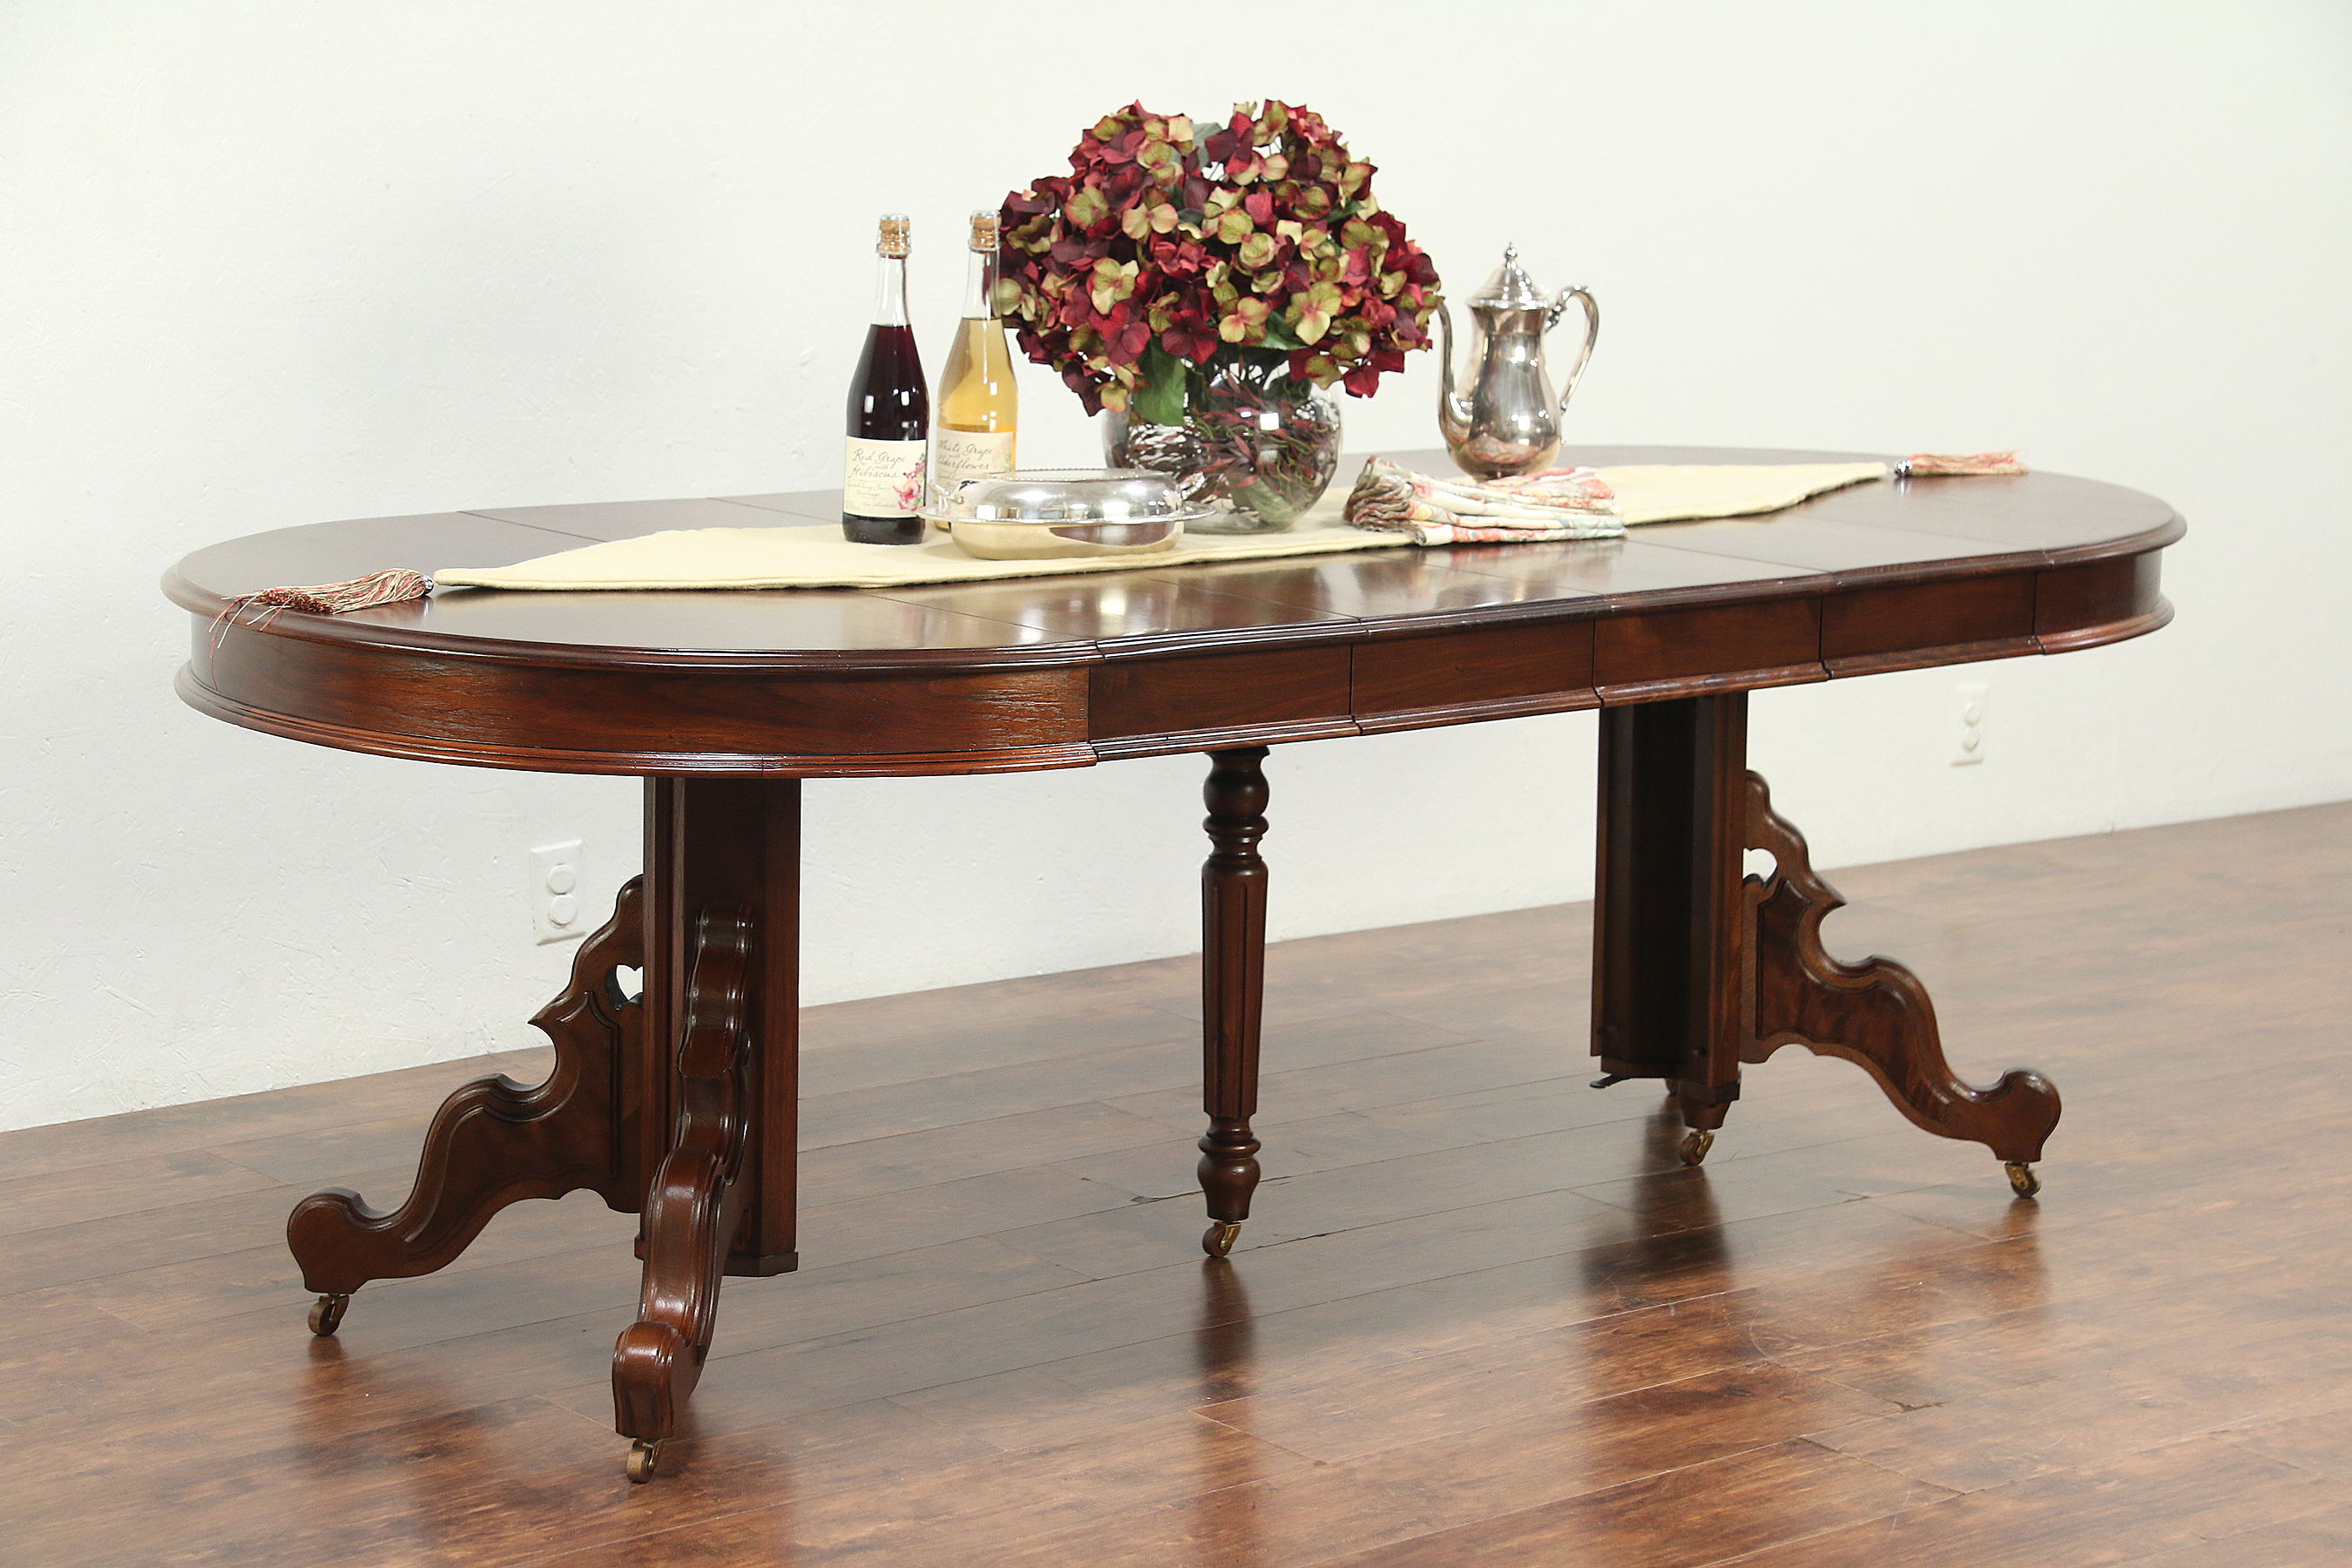 Sold Victorian Antique Round Walnut Dining Table 4 Leaves Extends 7 5 29110 Harp Gallery Antiques Furniture